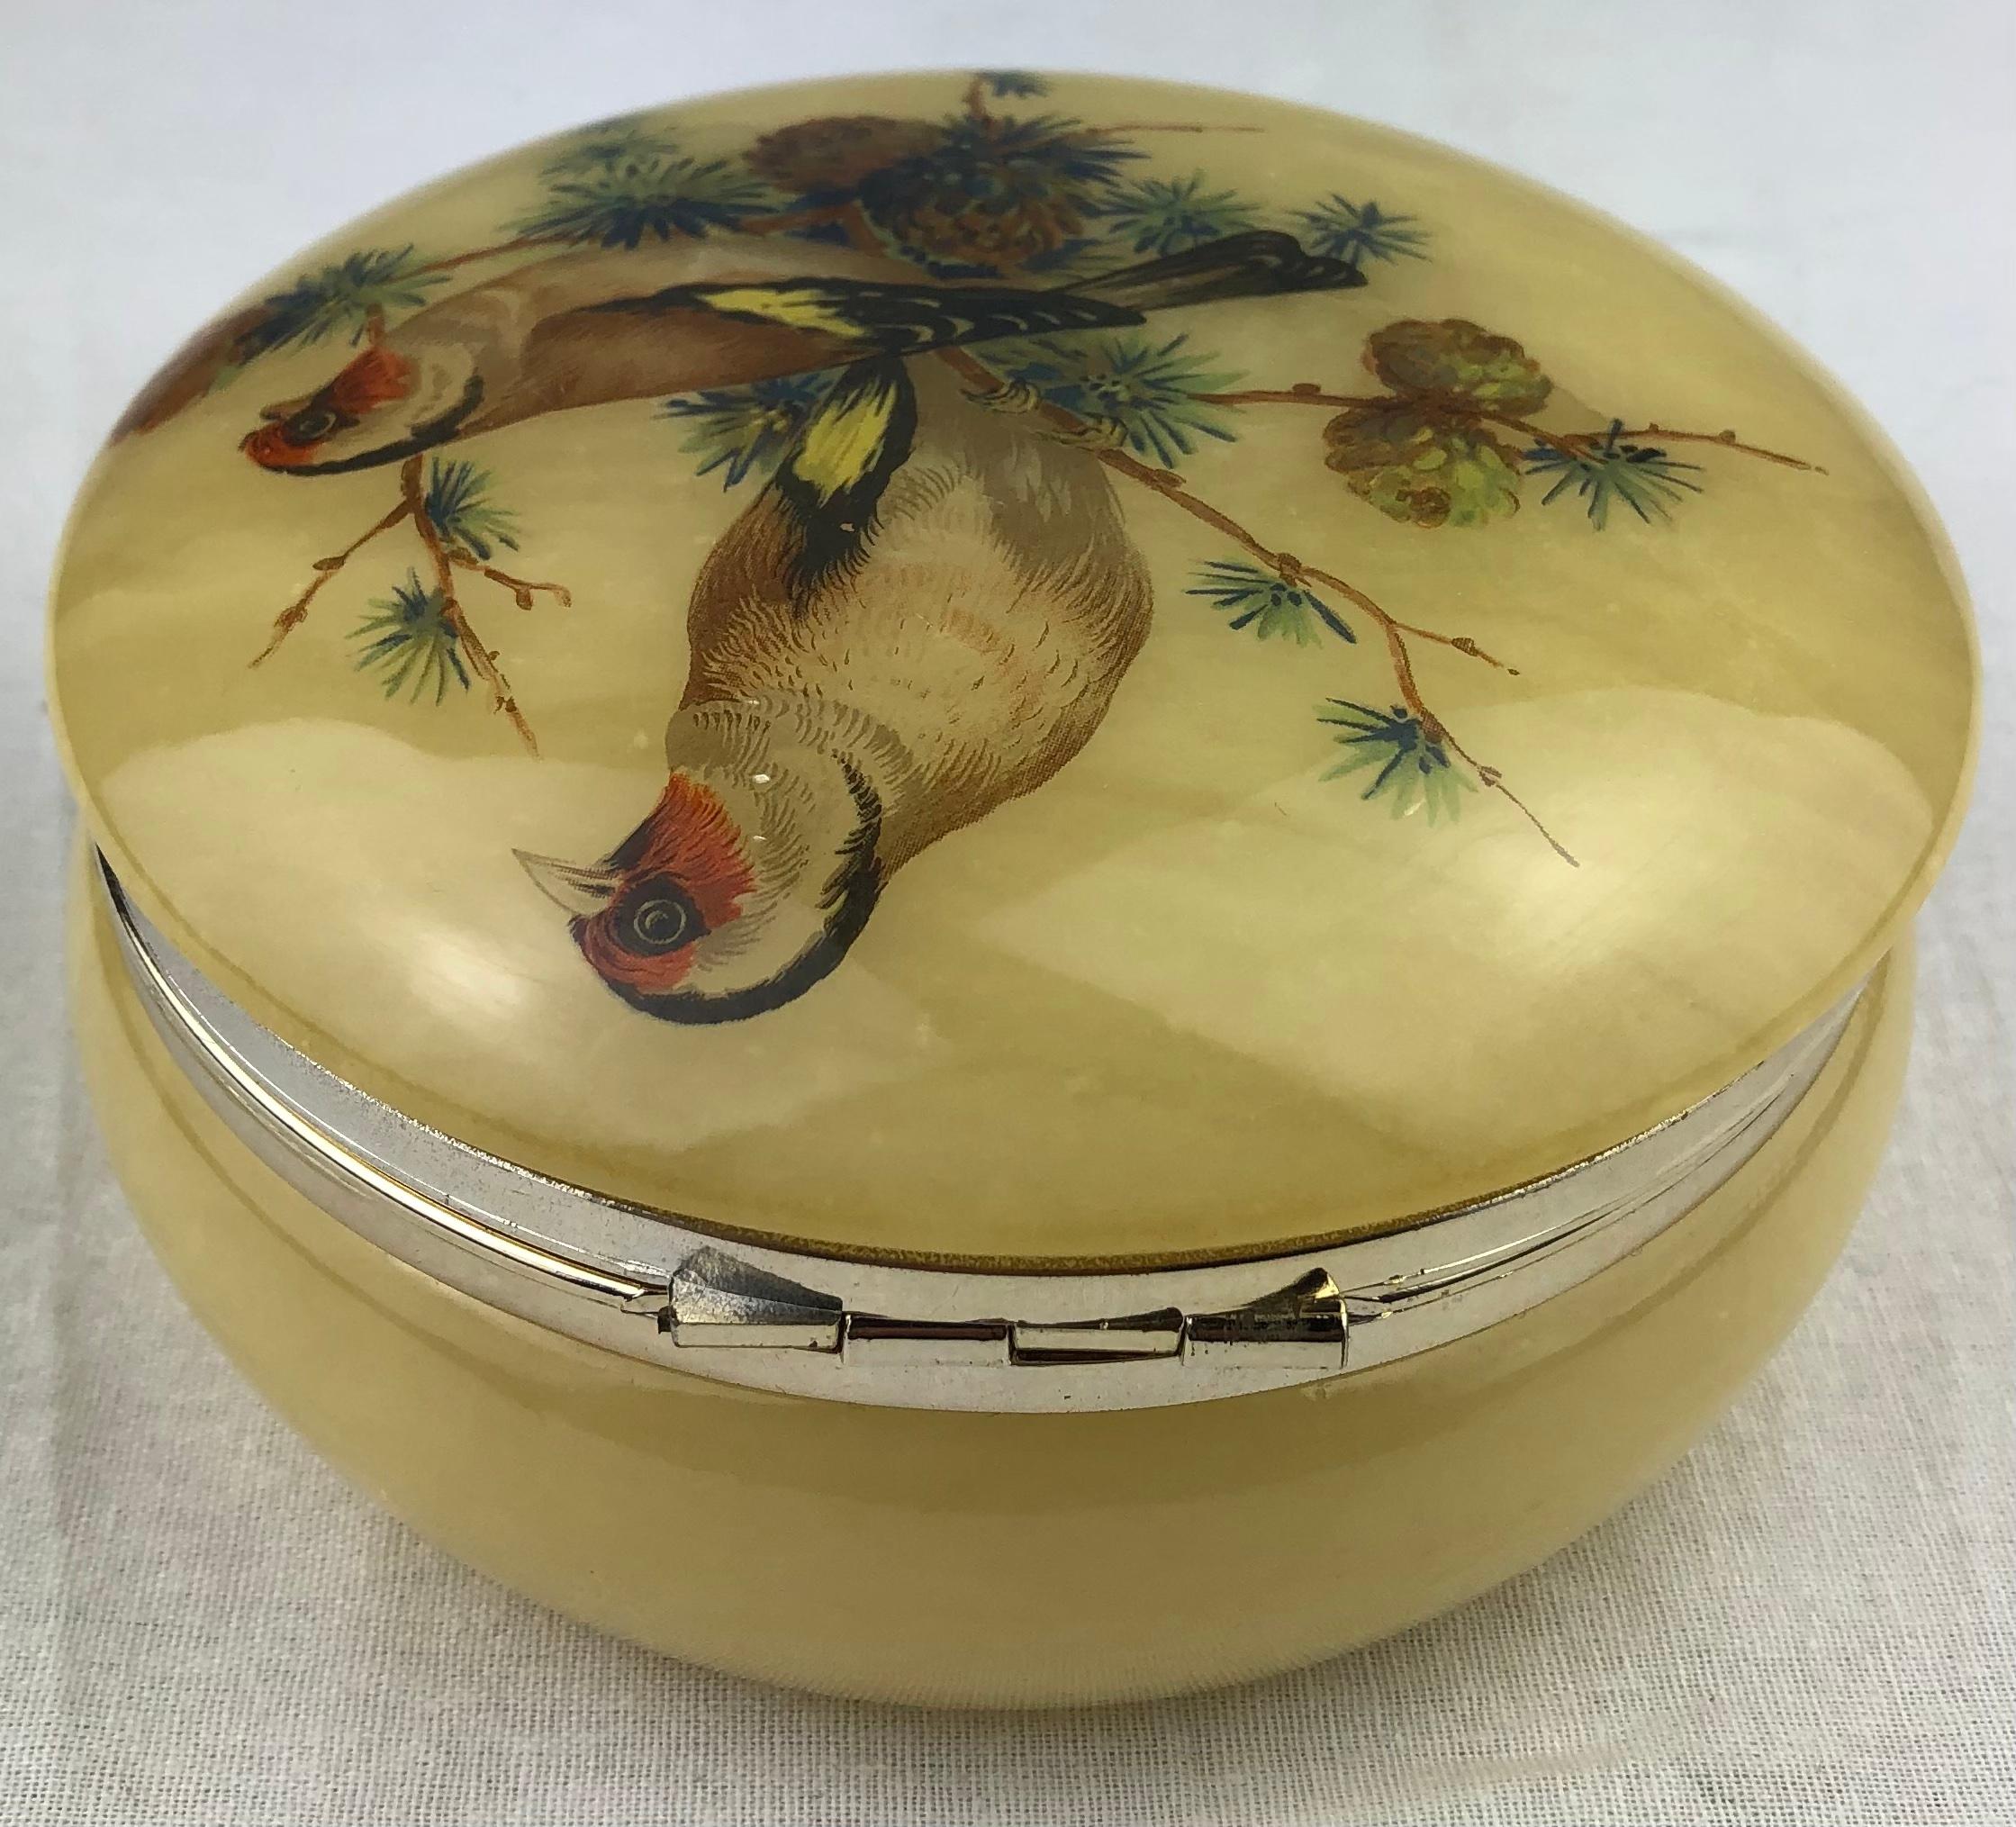 Beautiful hand painted alabaster trinket, or jewelry box. 

The decoration consists of lovely birds and foliage, colors include blue, yellow, green, and different shades of brown. Gorgeous hand painted box, makes a lovely gift to oneself or